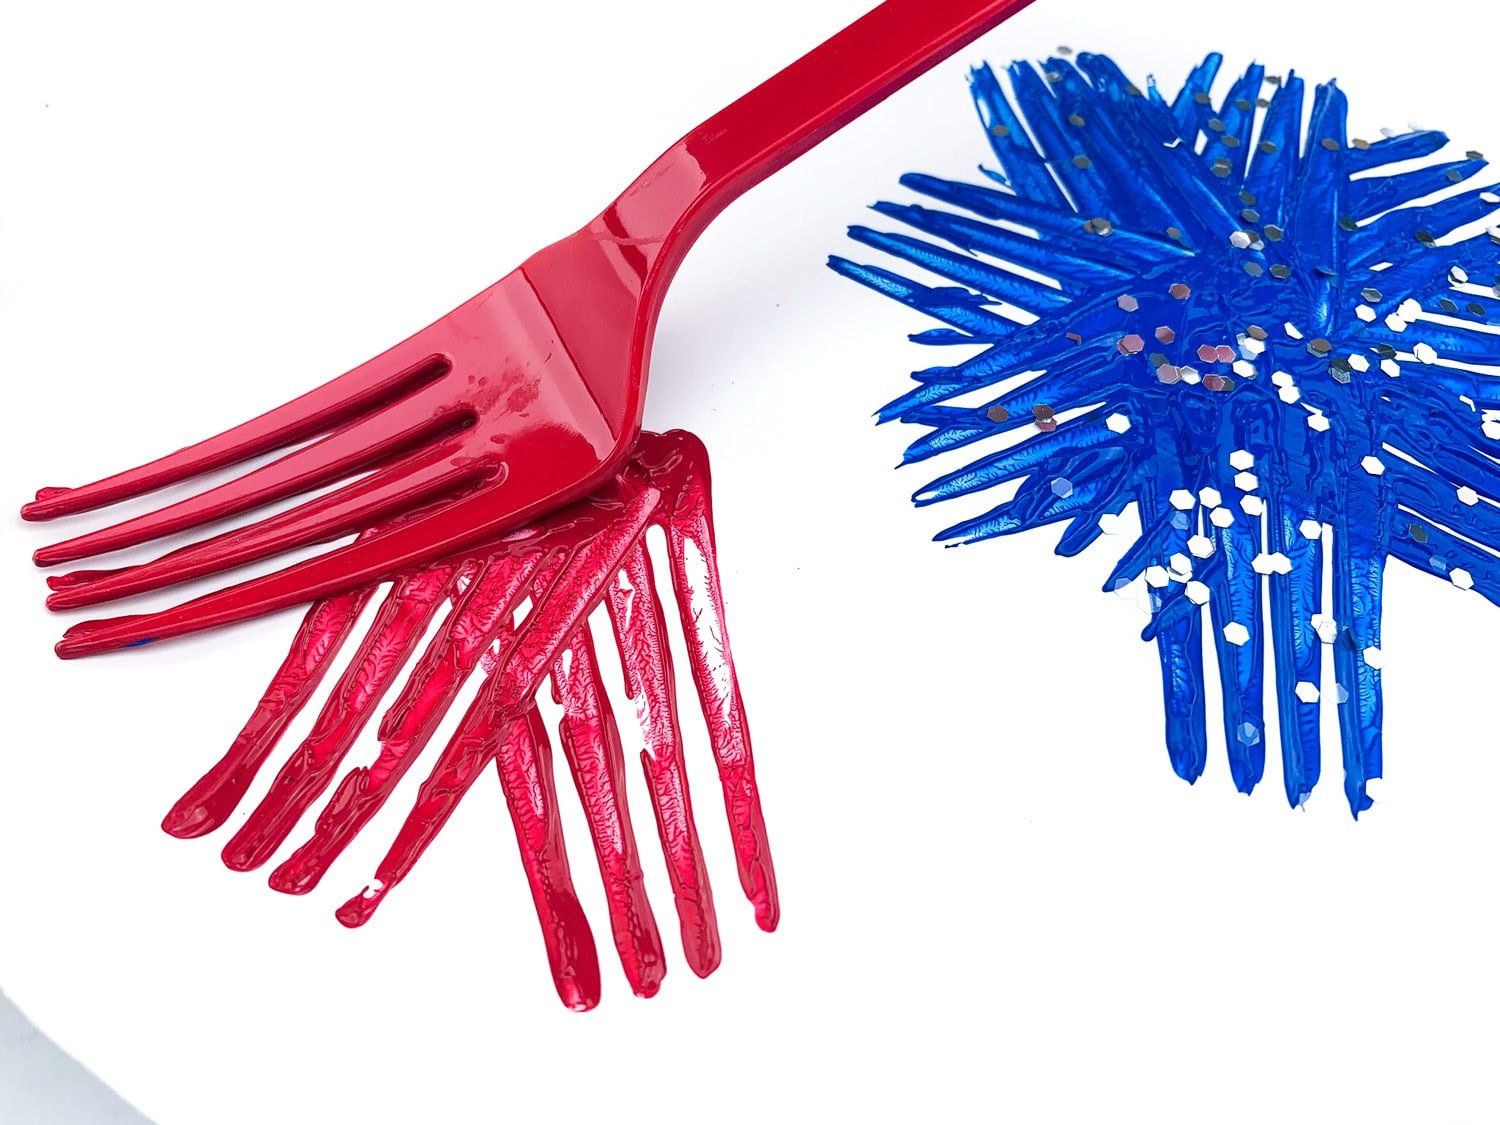 painted fork pressing firework pattern onto paper plate